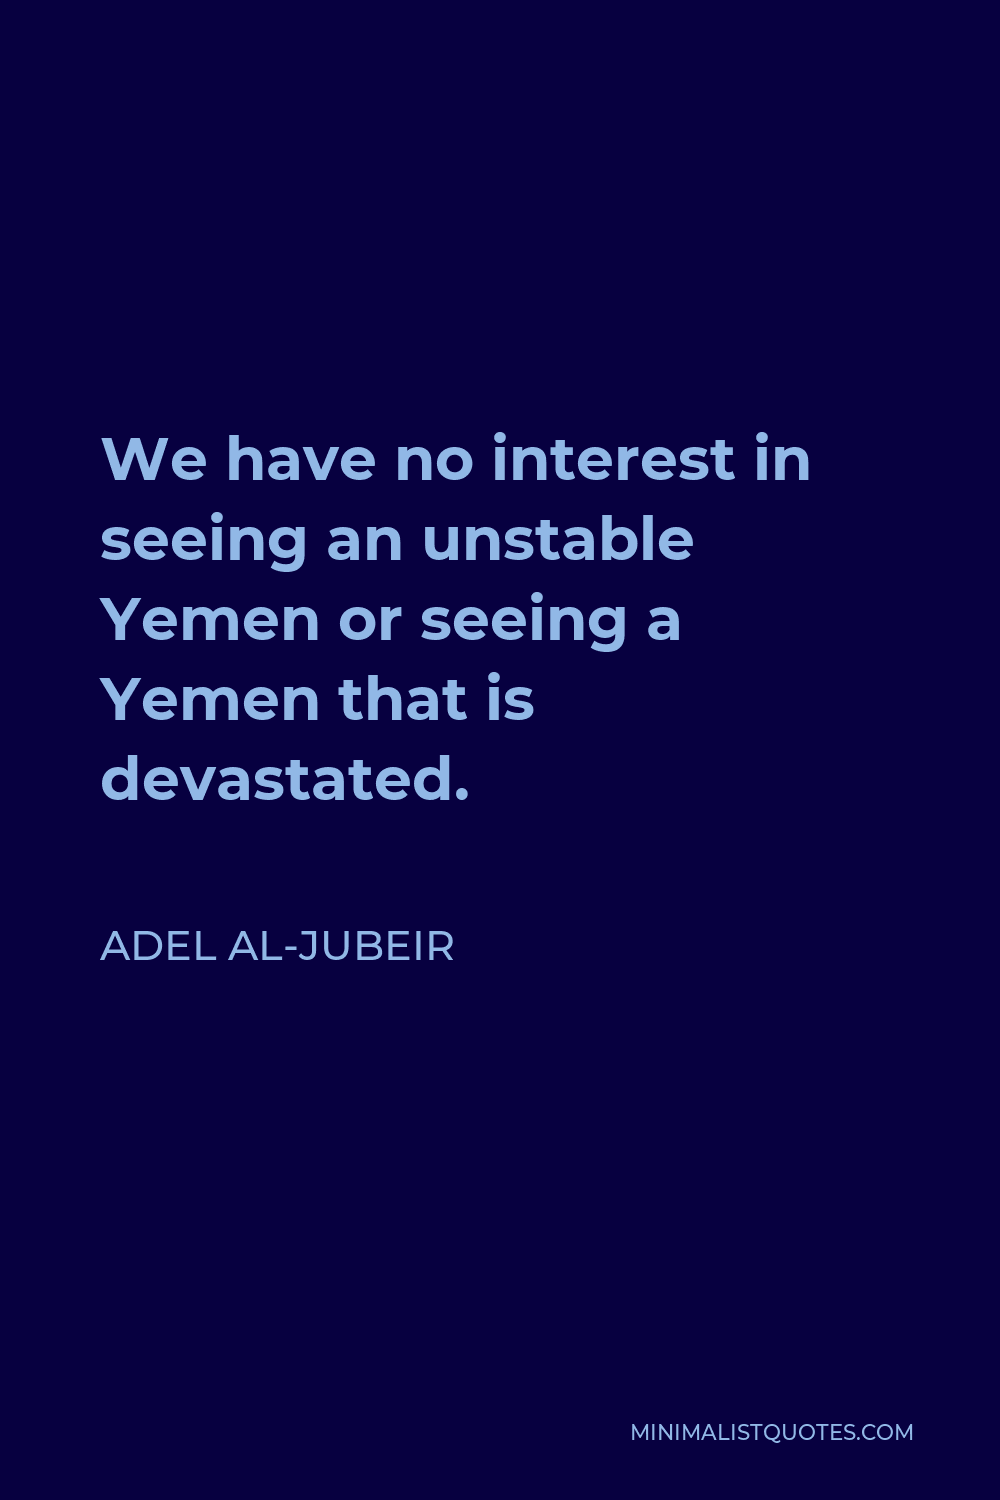 Adel al-Jubeir Quote - We have no interest in seeing an unstable Yemen or seeing a Yemen that is devastated.